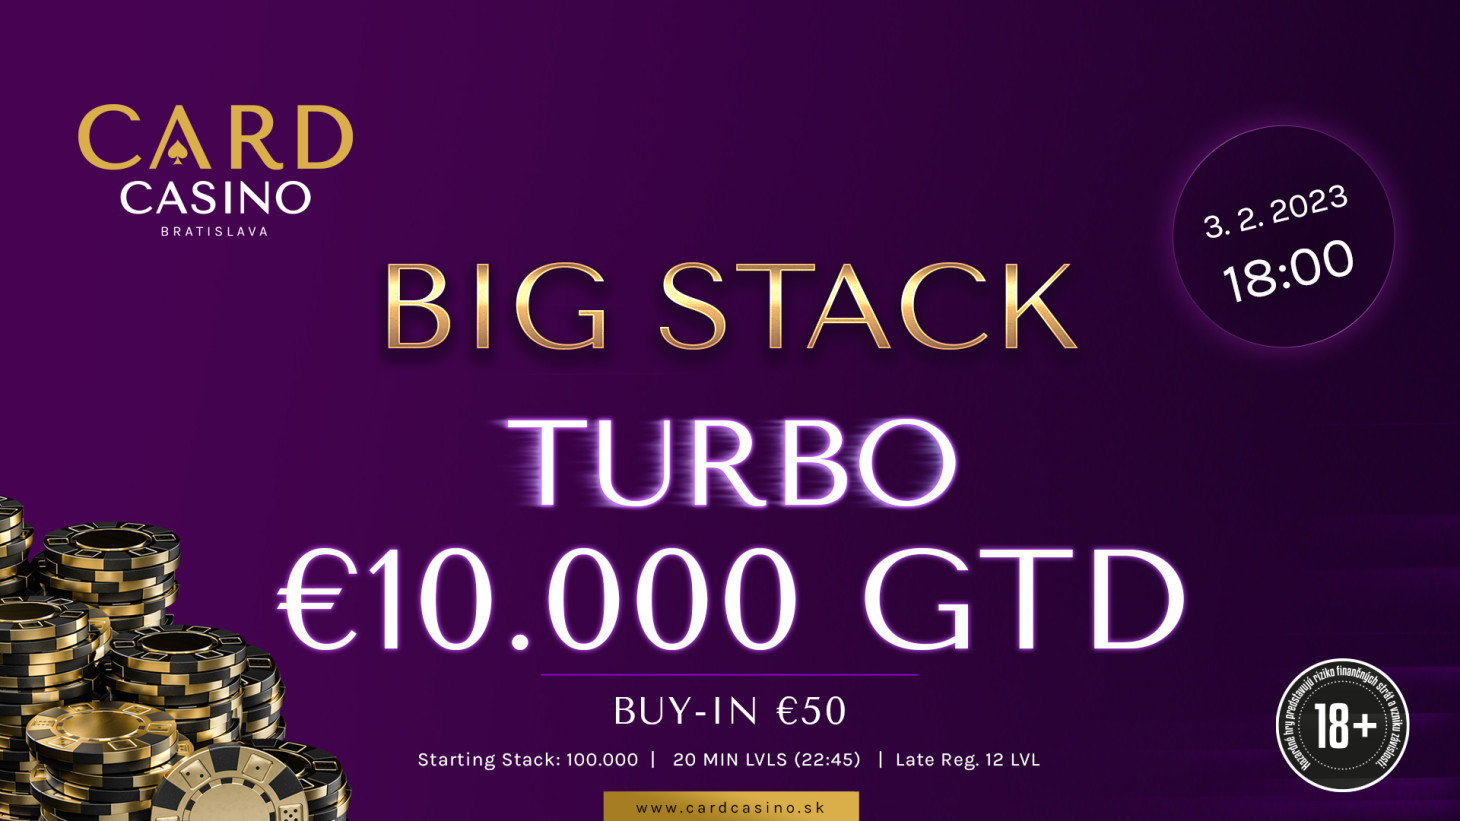 Single days packed with great guarantees. Saturday's €50,000 GTD Elite is the highlight of the week